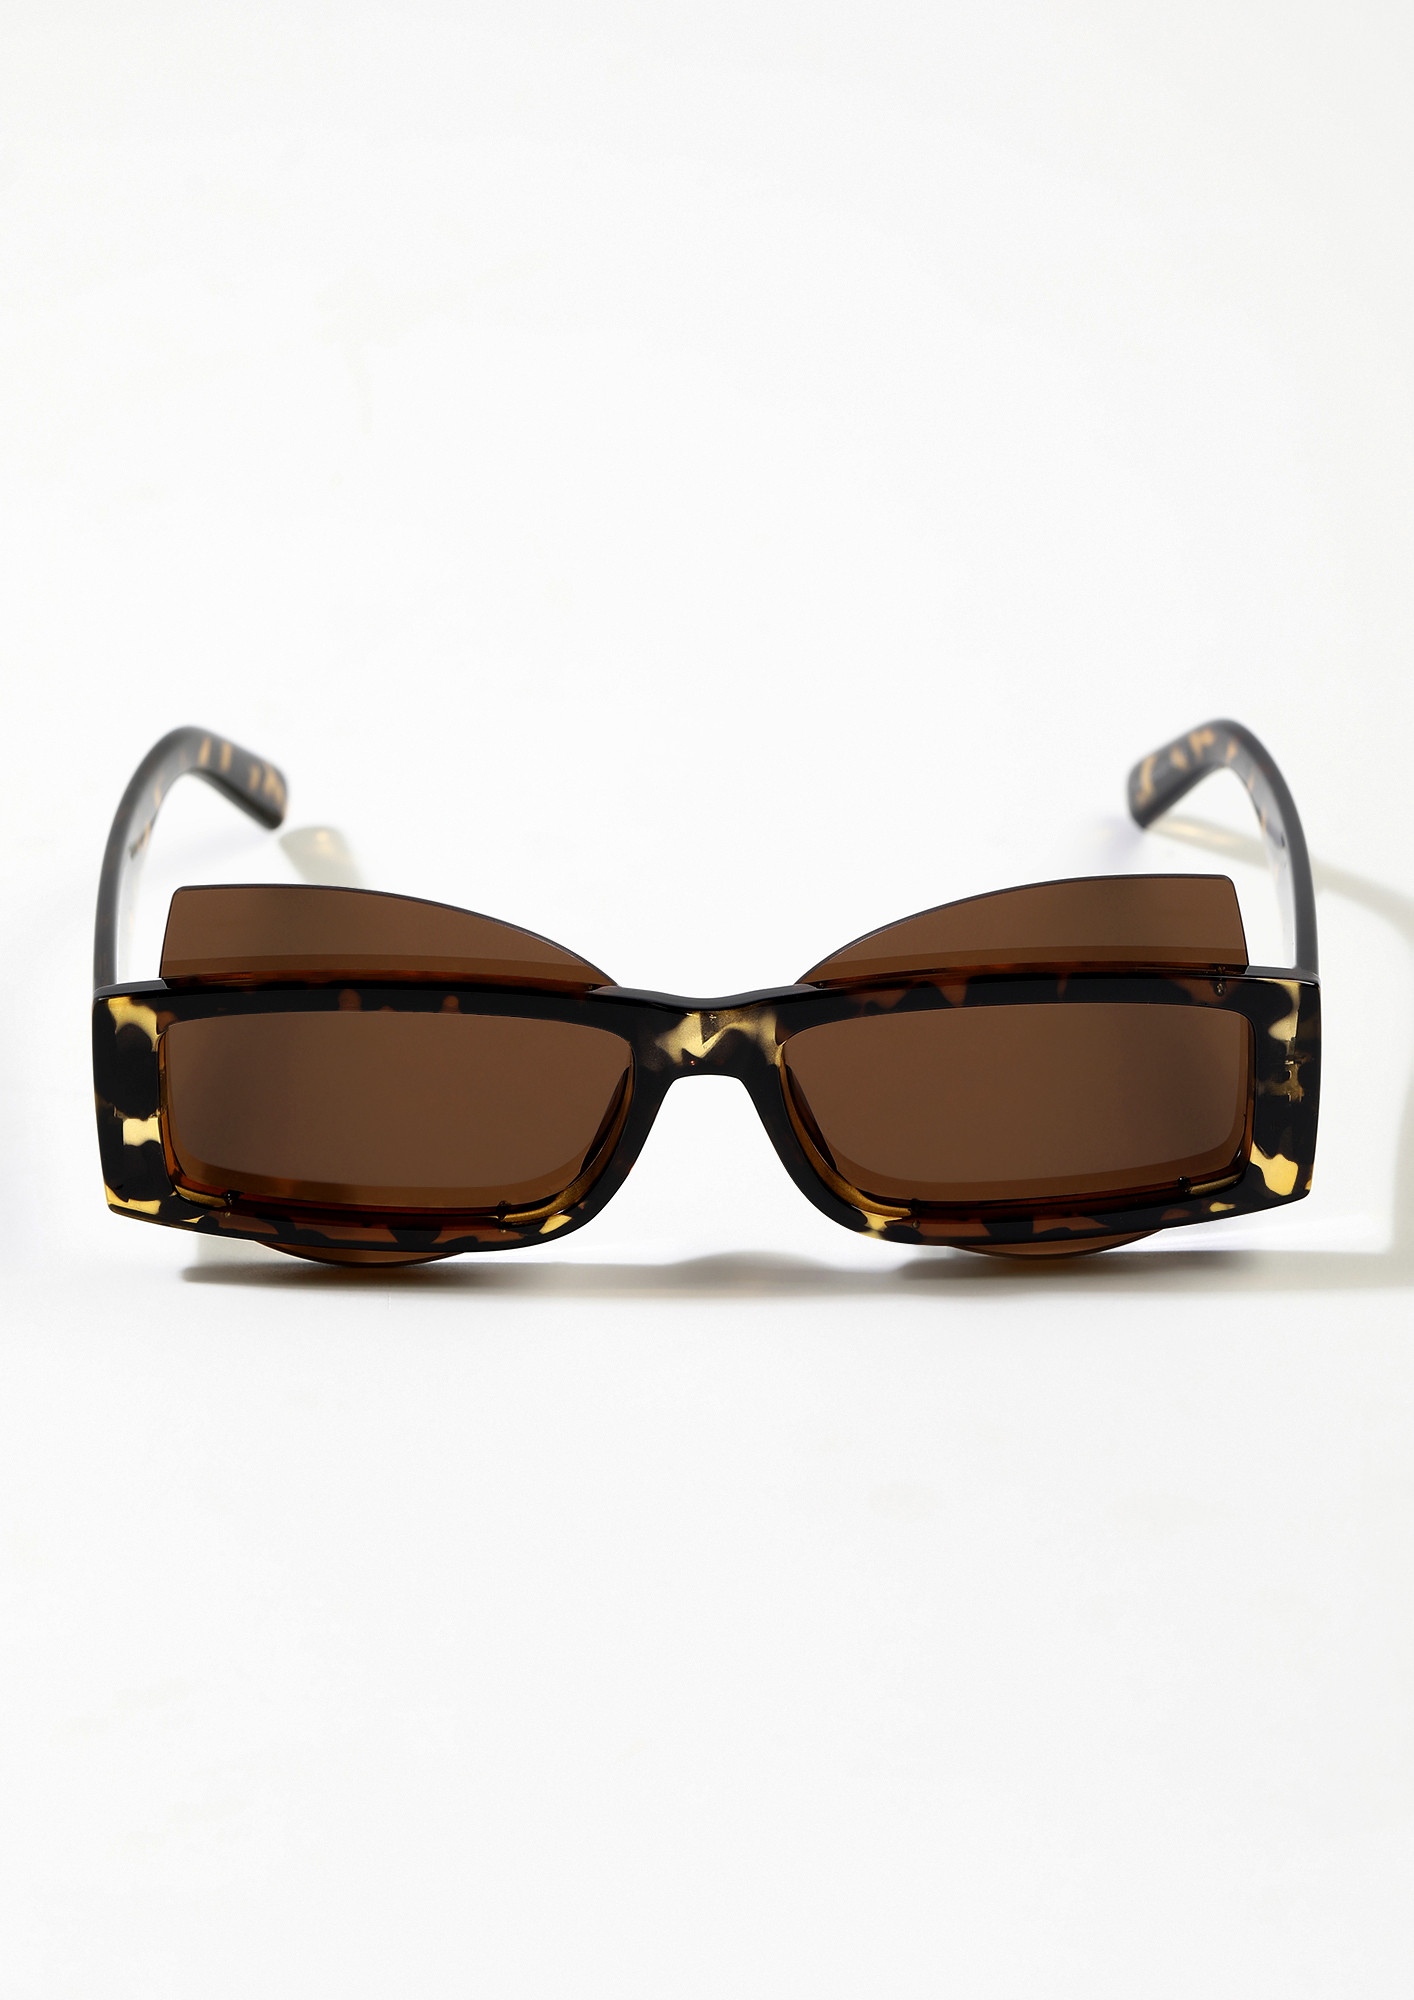 DOUBLE TROUBLE AMBER BROWN SUNGLASSES